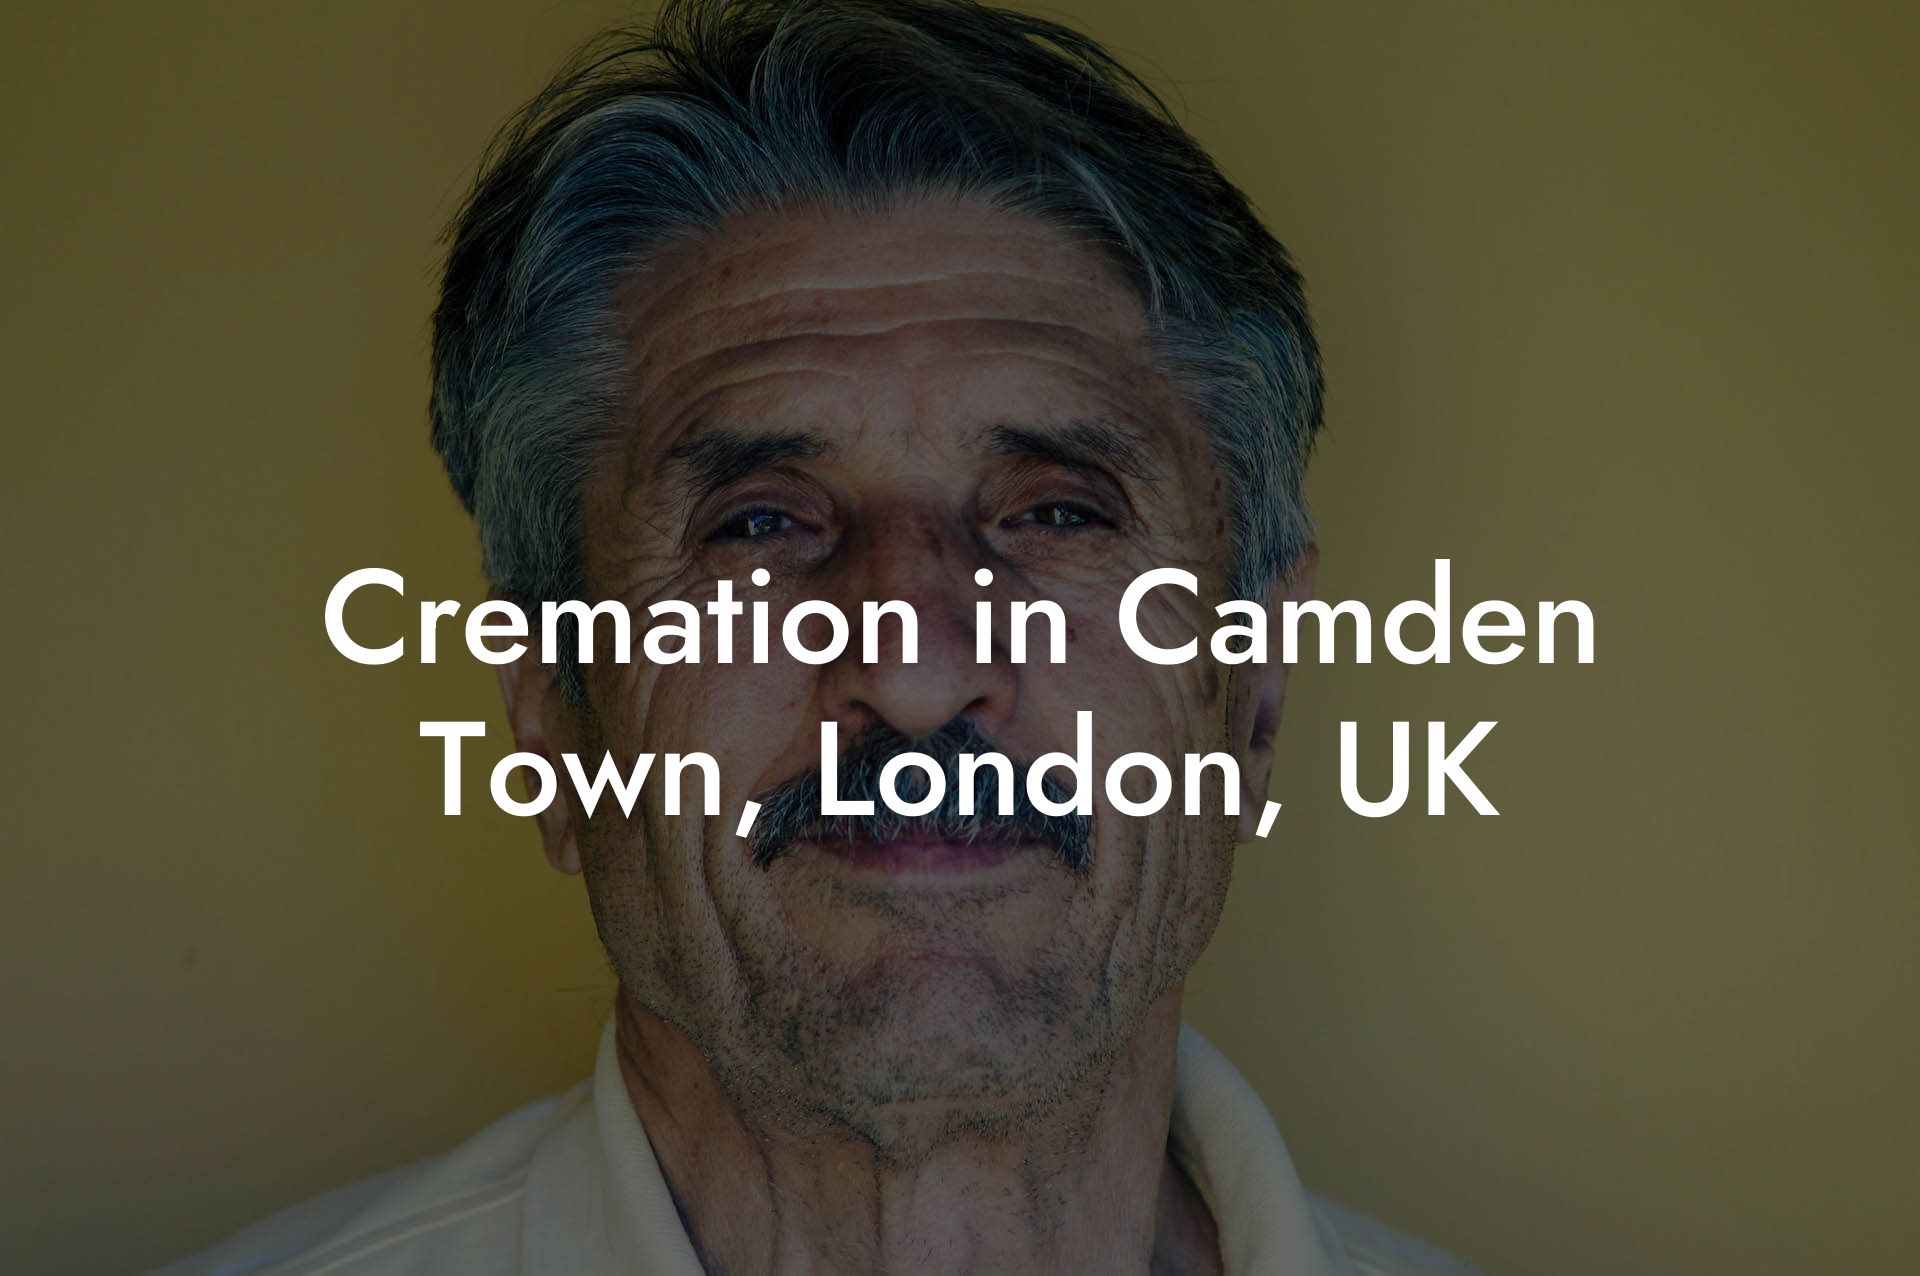 Cremation in Camden Town, London, UK